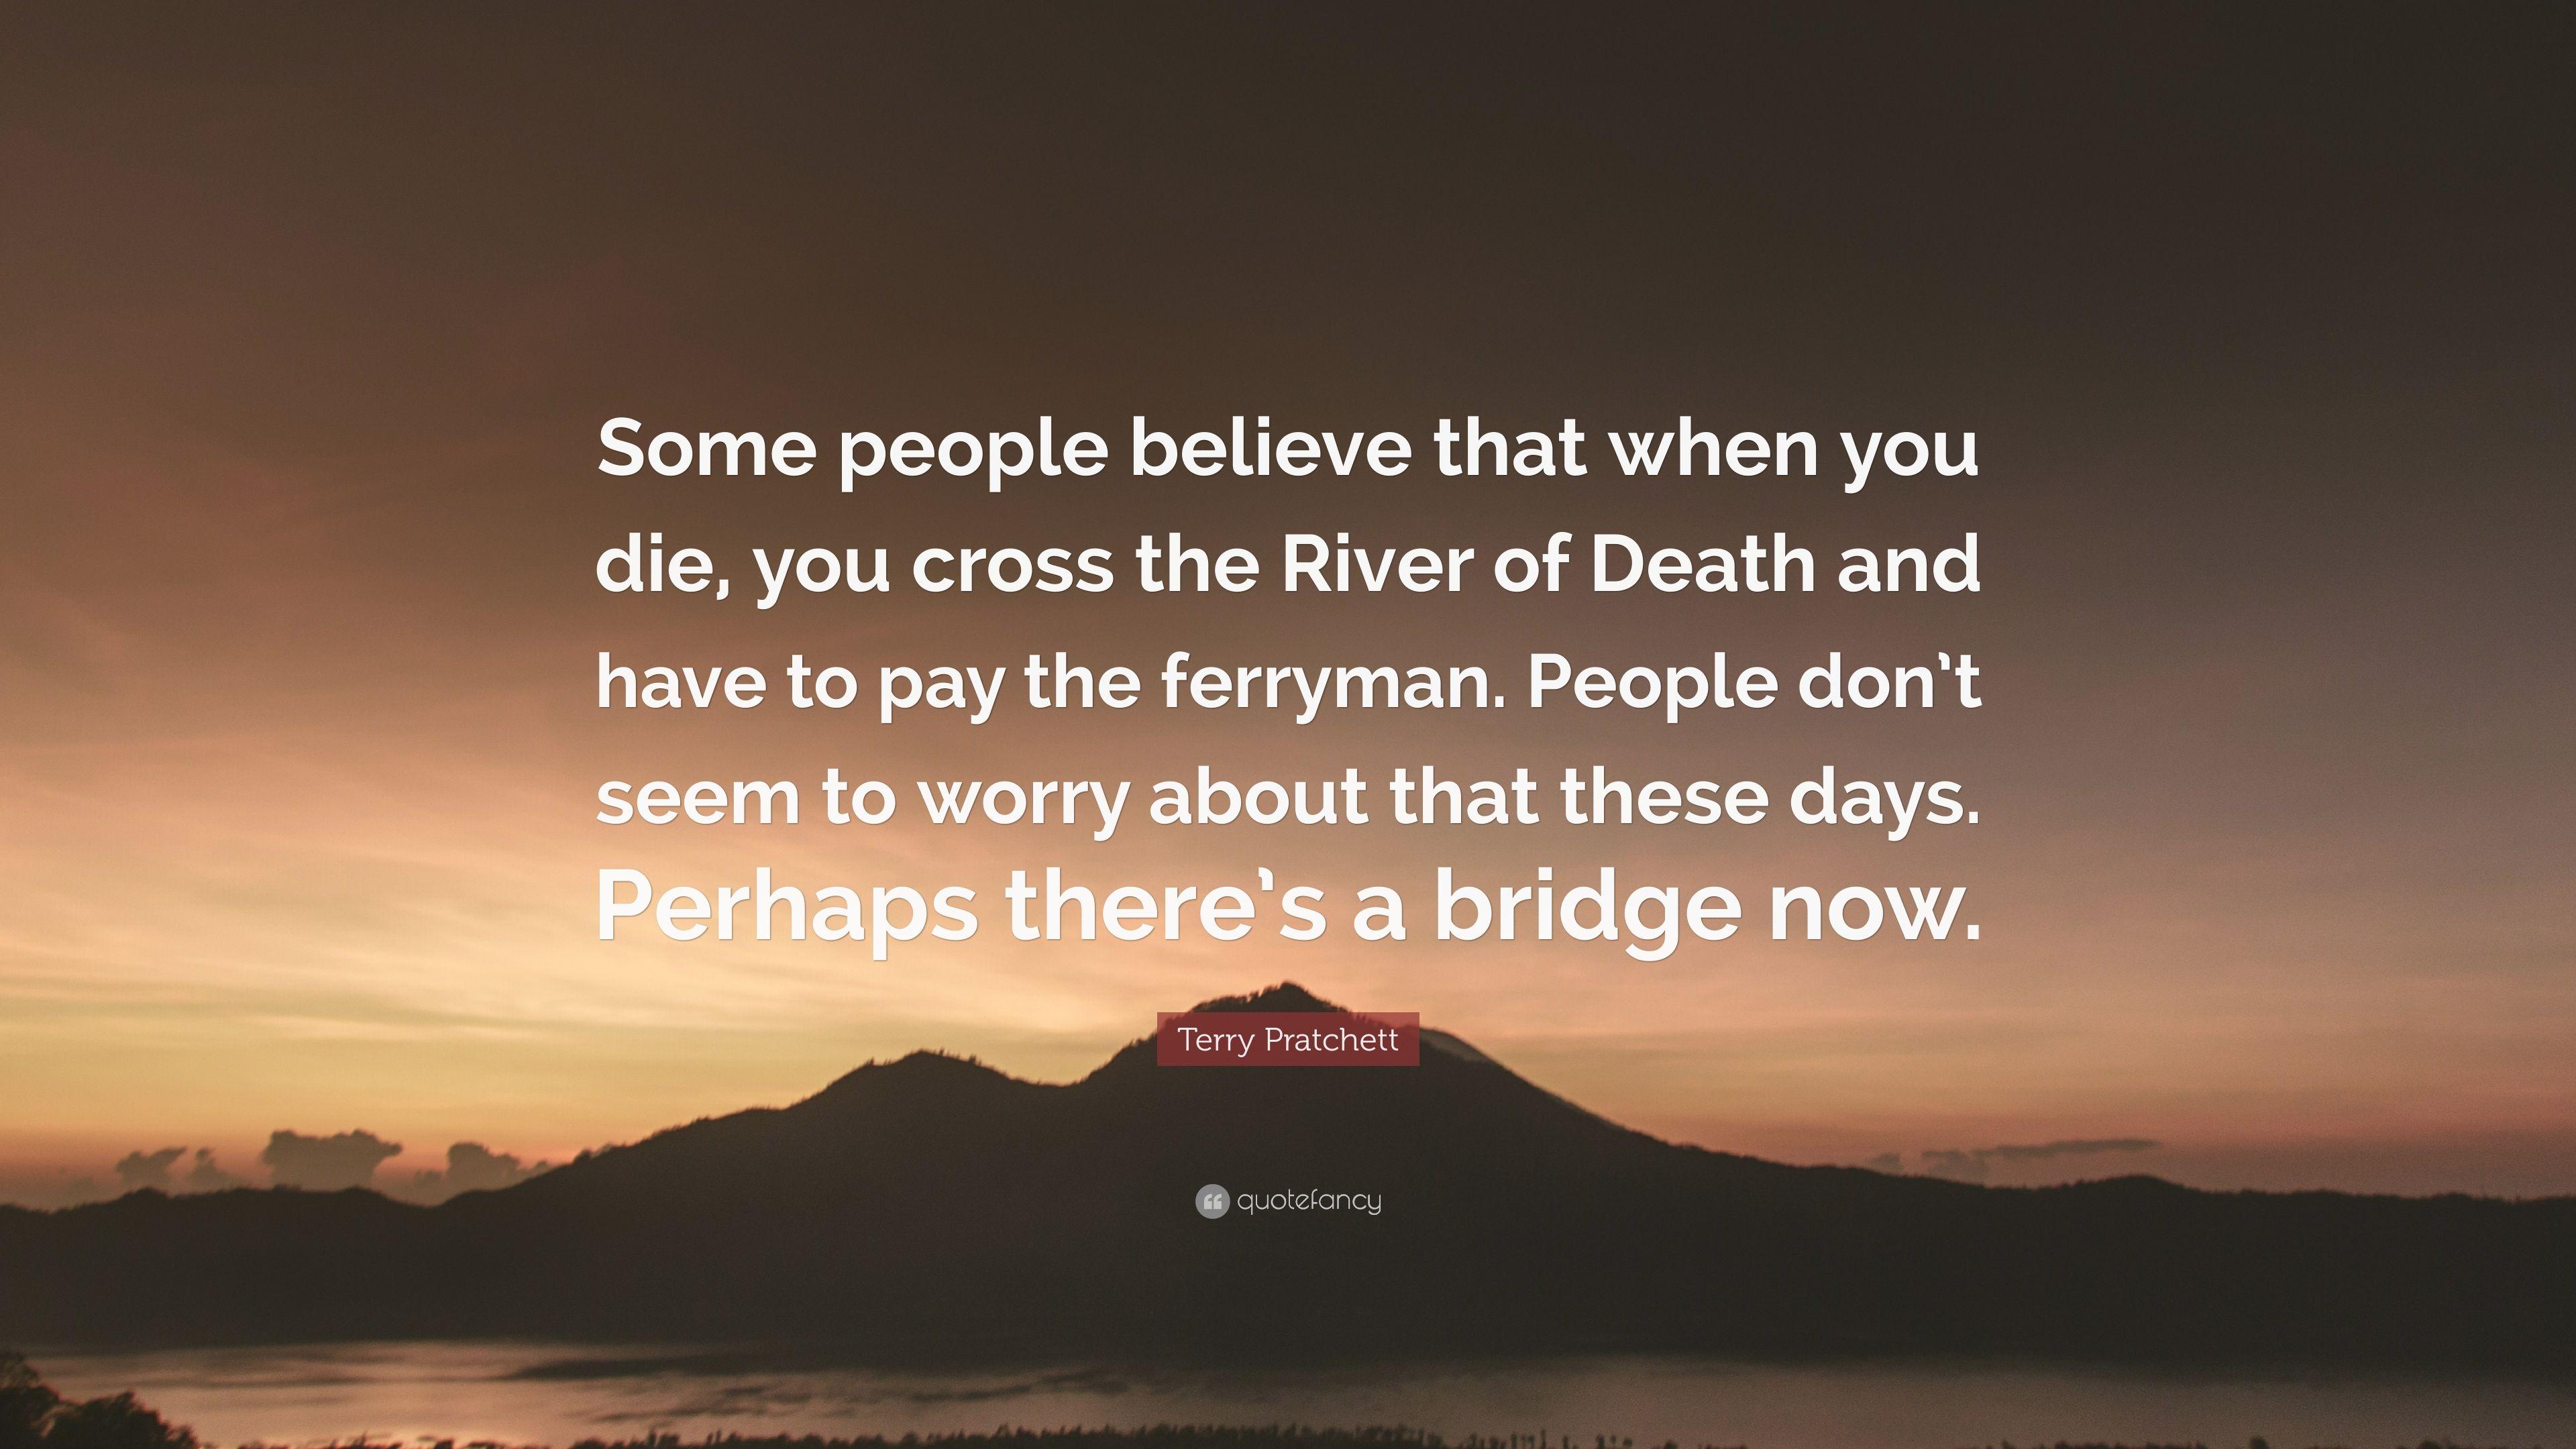 Terry Pratchett Quote: “Some people believe that when you